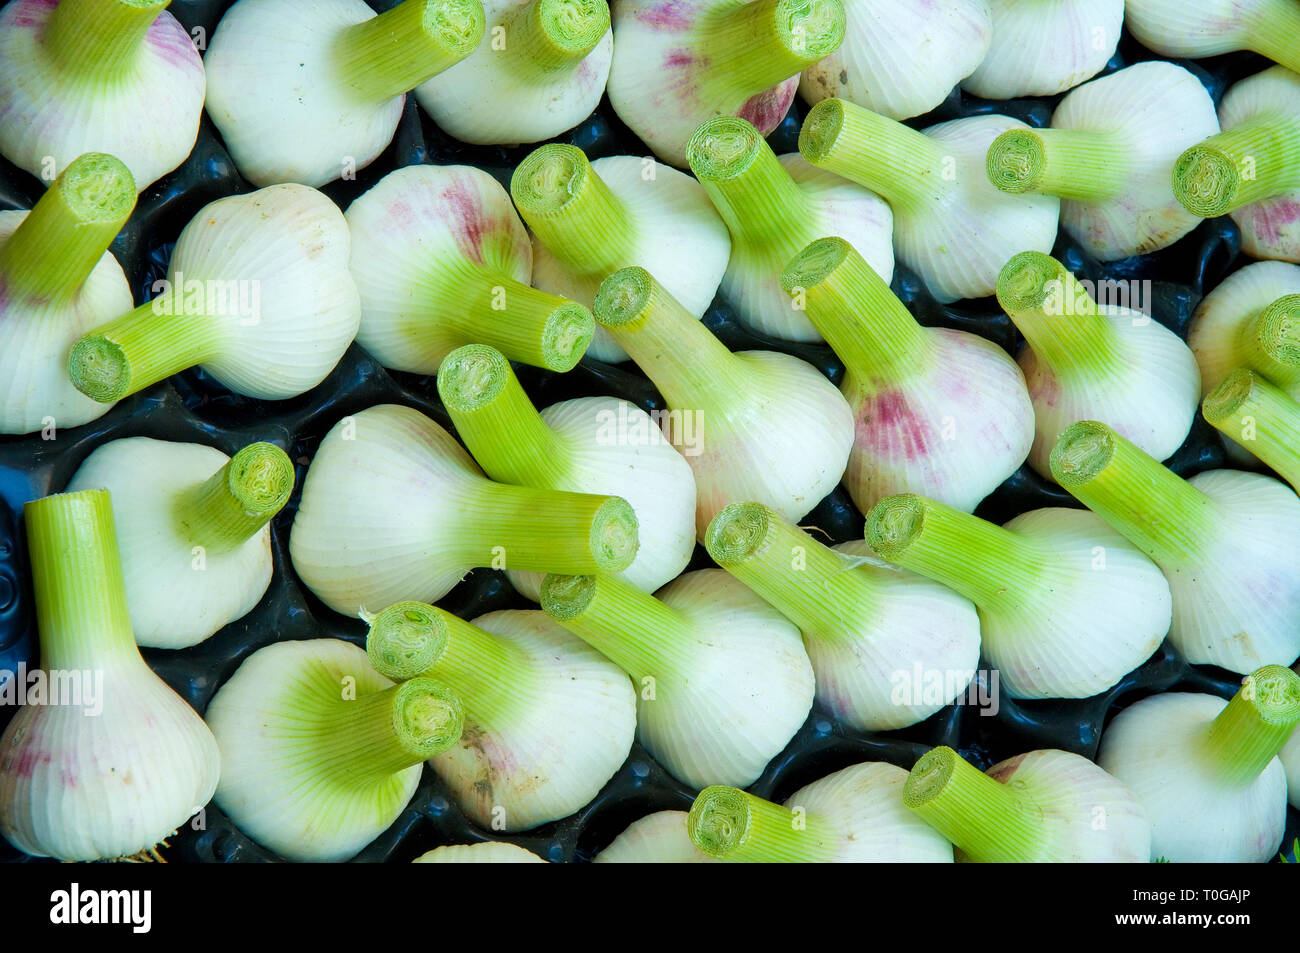 Wet garlic, sometimes called green garlic is freshly harvested garlic that has not been hung. It is milder and and less pungent than the usual kind and can be used raw. Stock Photo